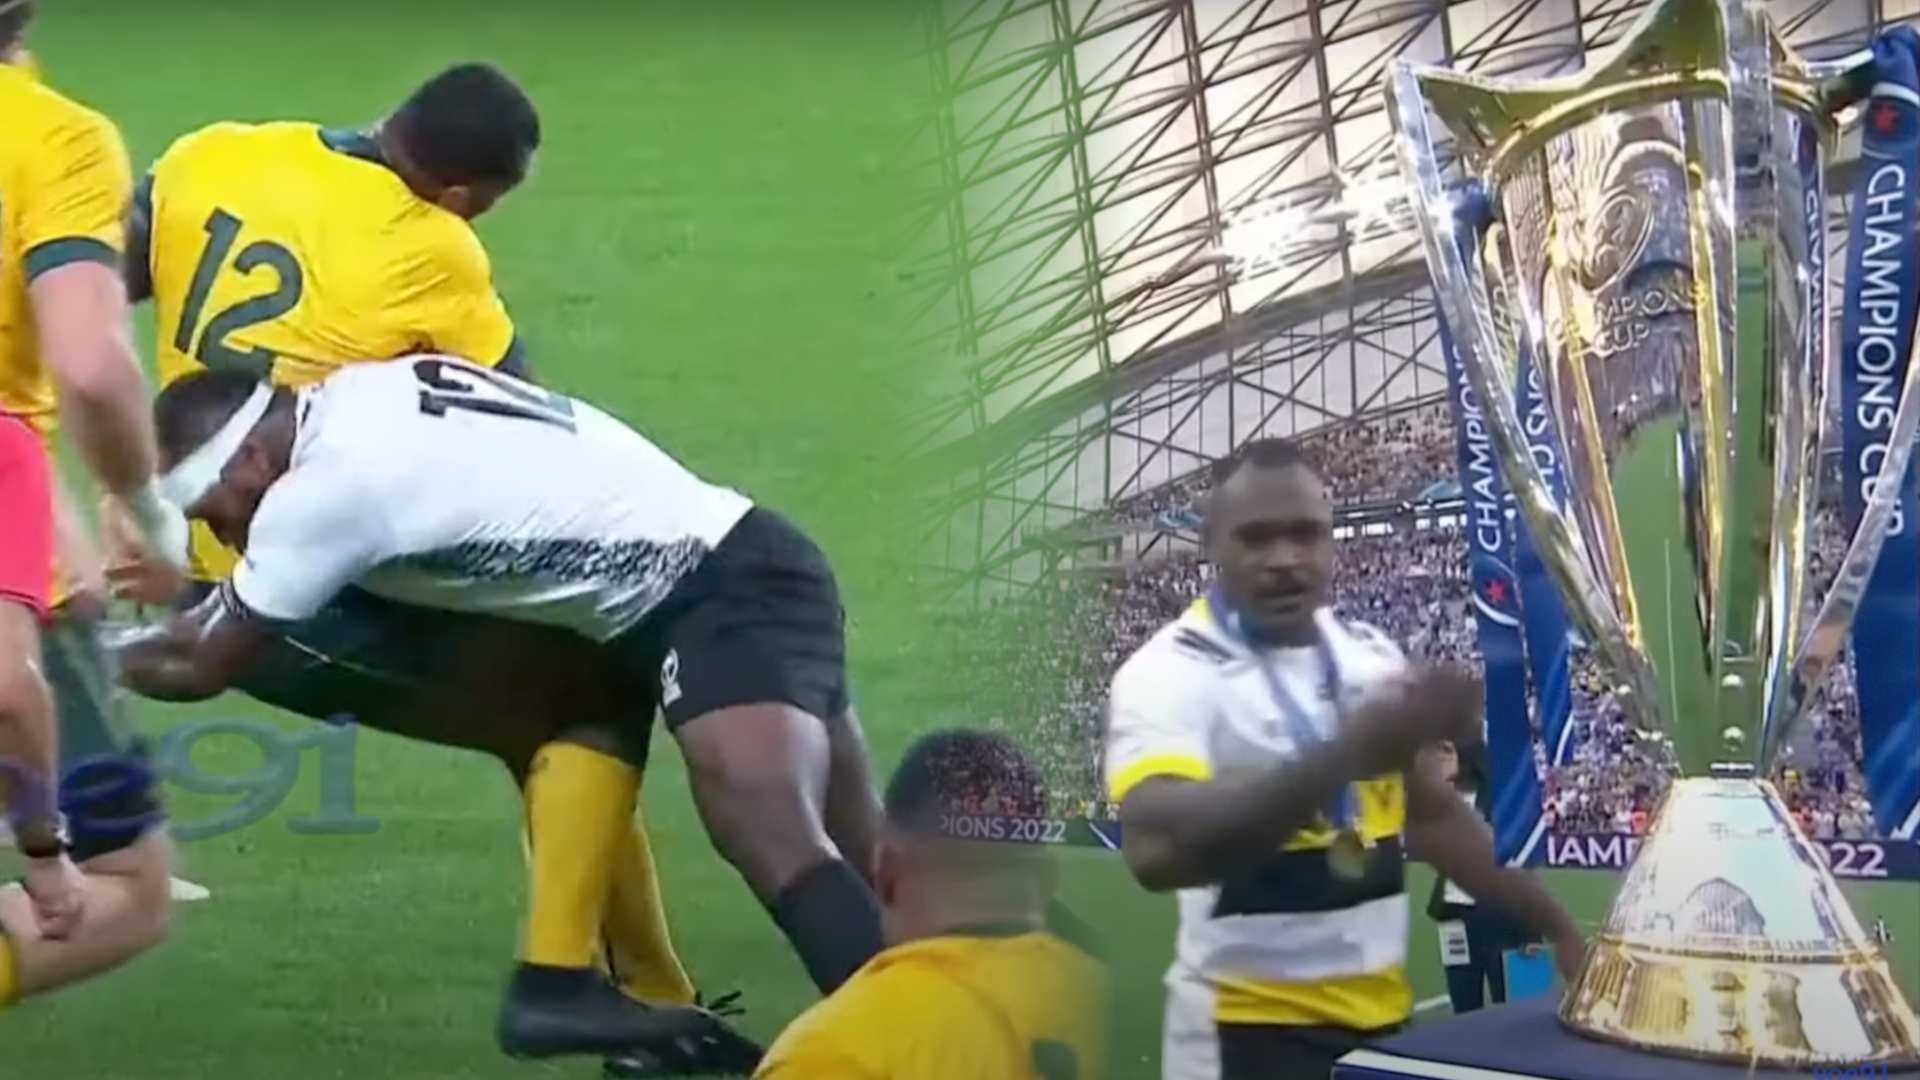 Video shows Fijian powerhouse is the ultimate hybrid player